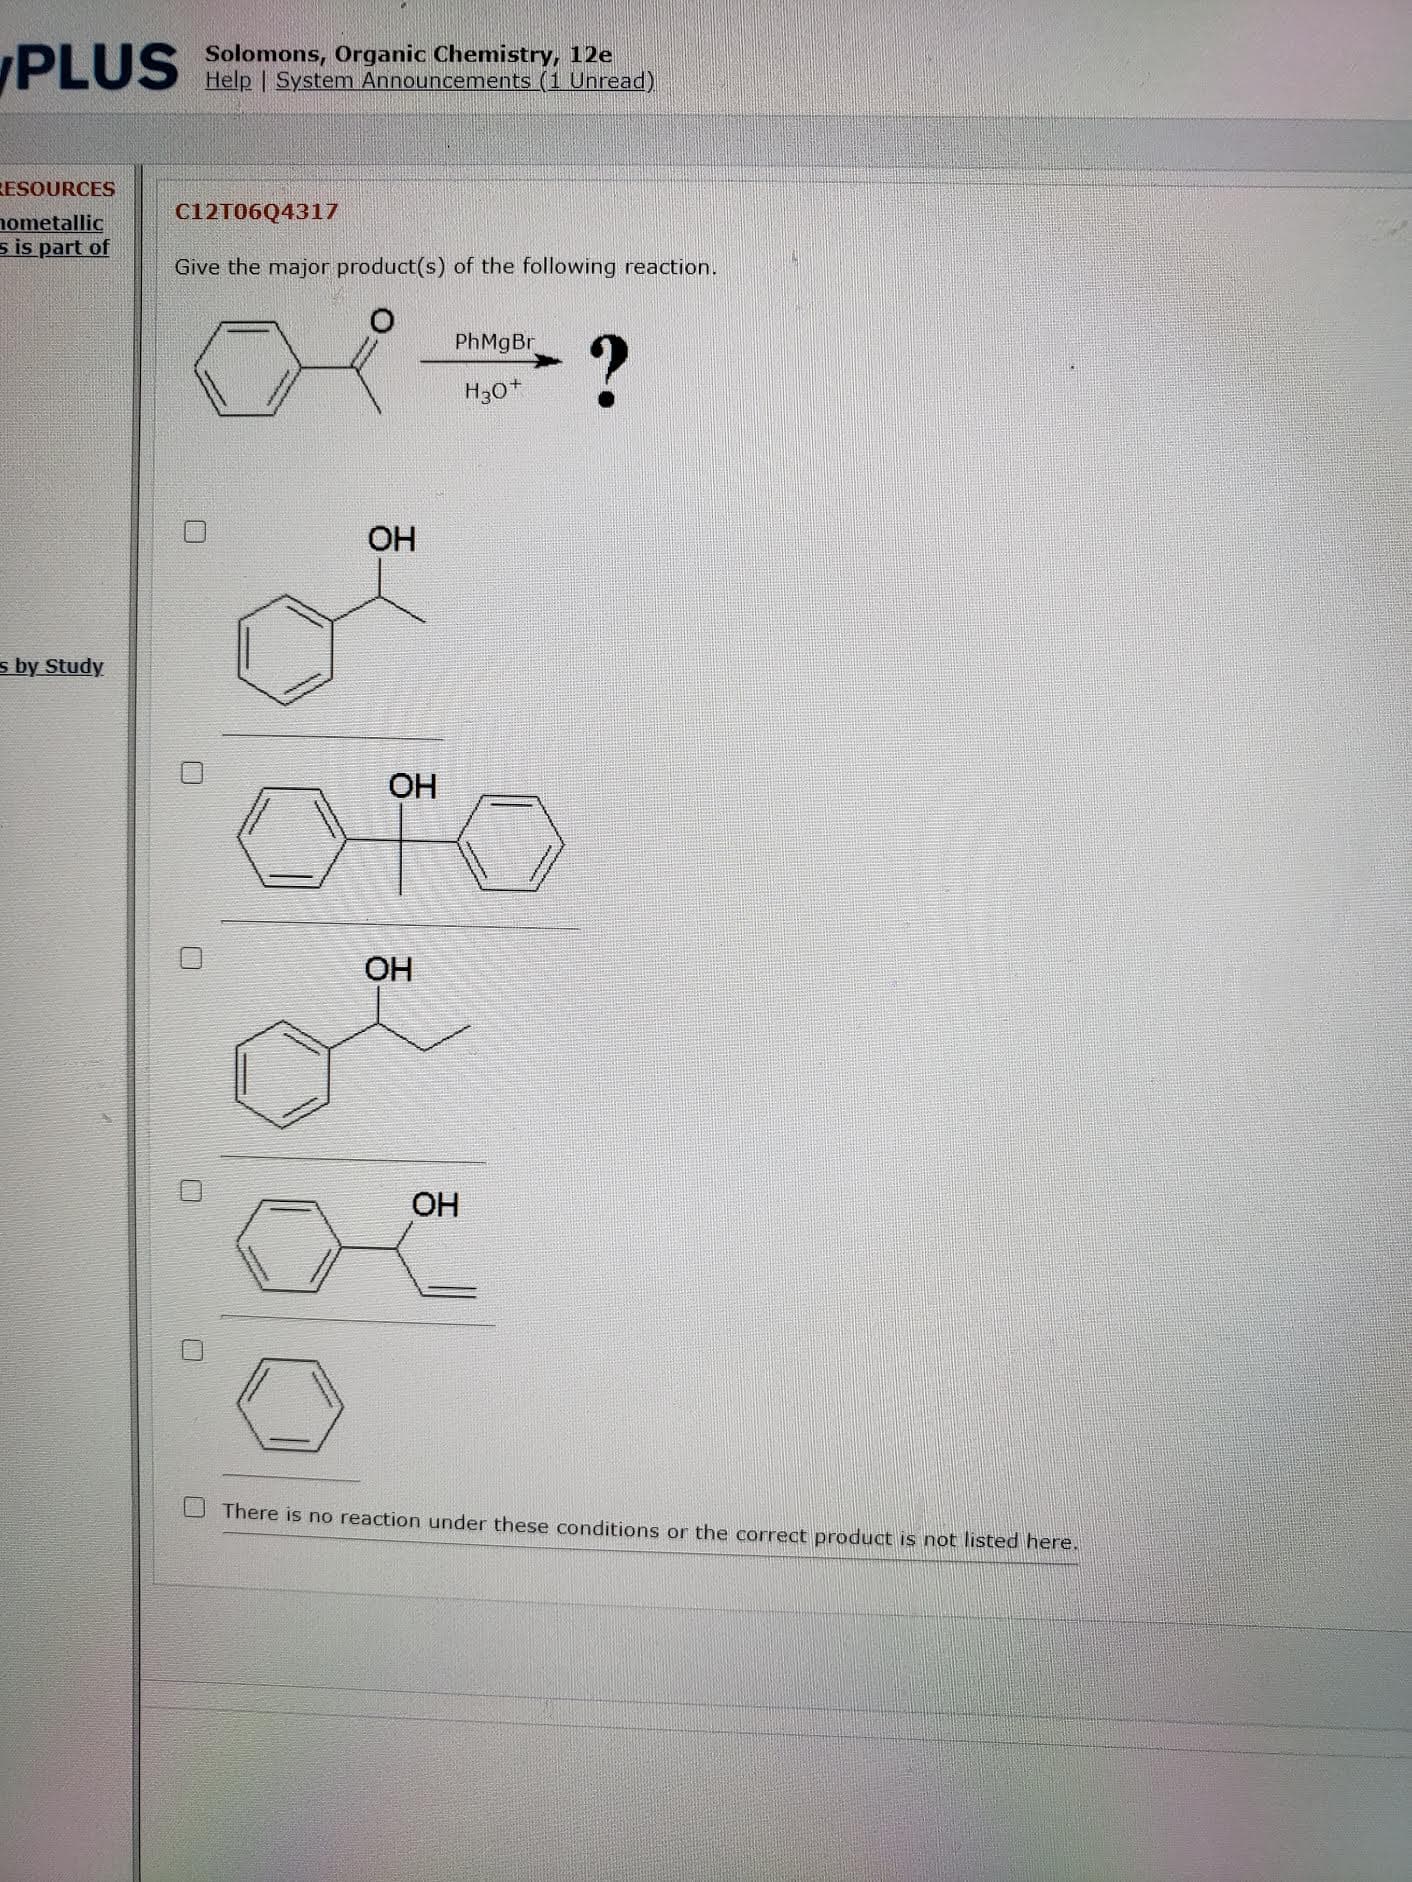 Give the major product(s) of the following reaction.
PhMgBr
H30*
